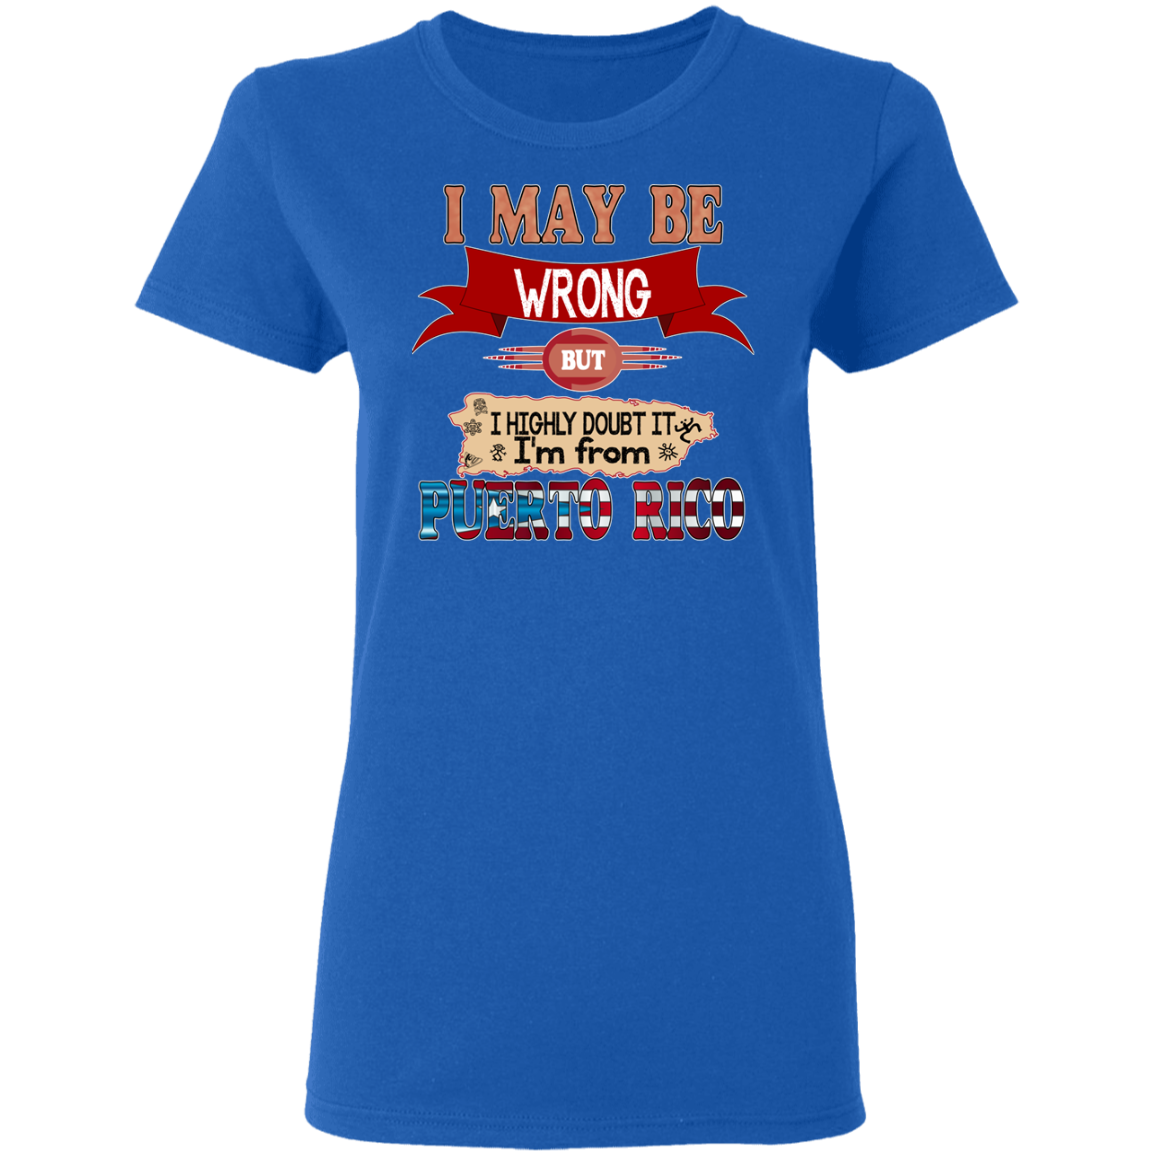 My Be Wrong But Doubt It - 5.3 oz. T-Shirt - Puerto Rican Pride